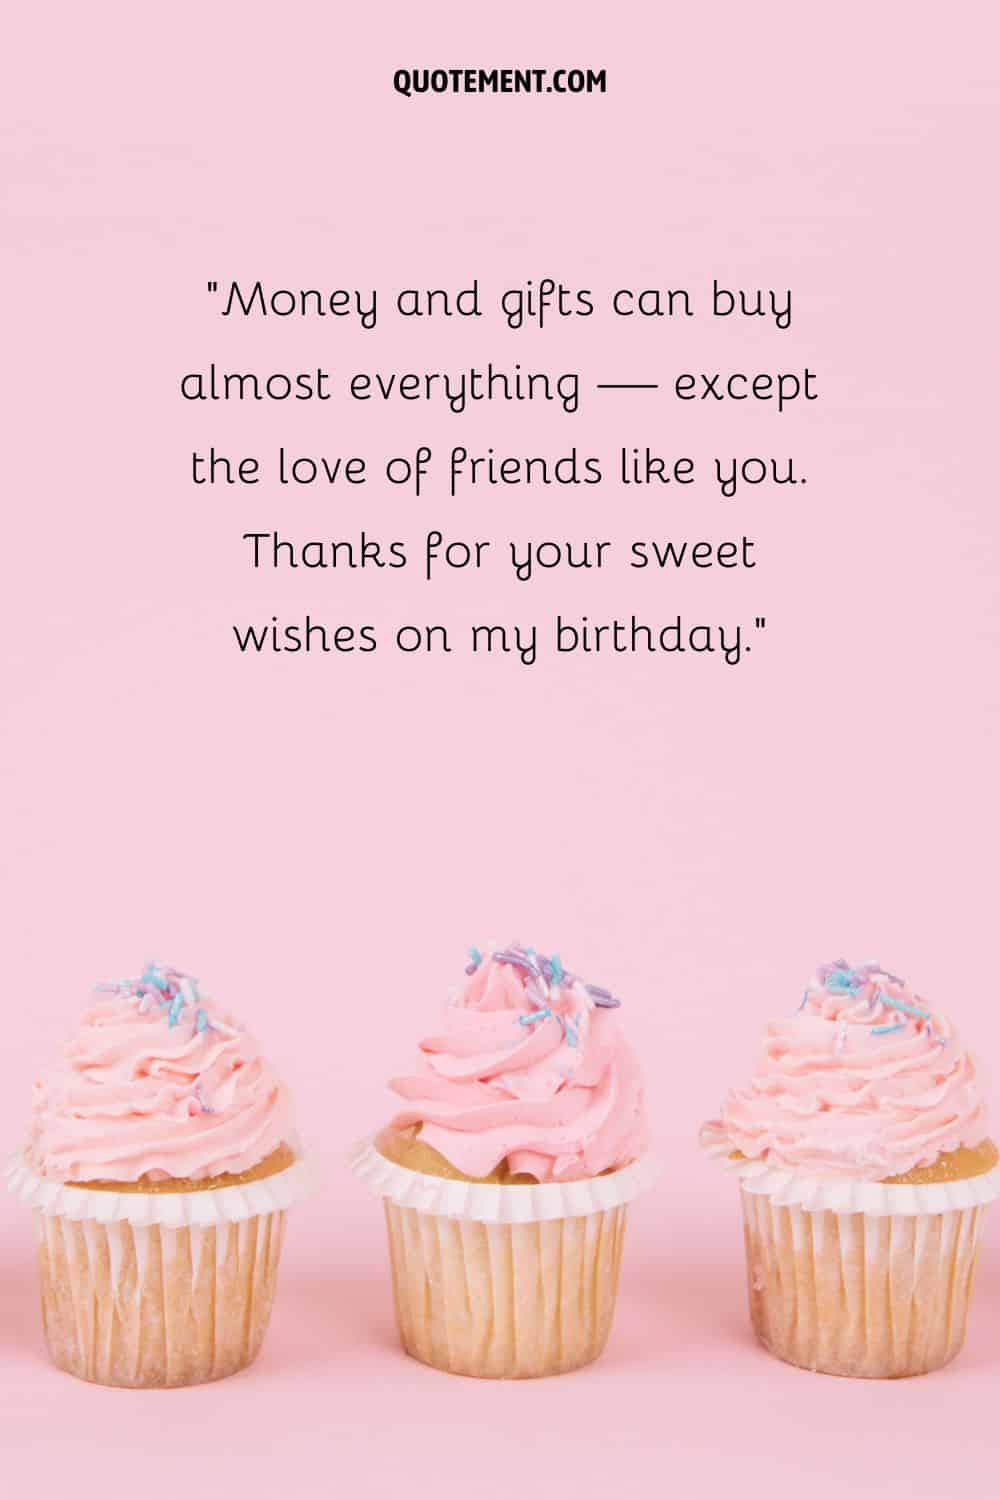 Money and gifts can buy almost everything — except the love of friends like you. Thanks for your sweet wishes on my birthday.